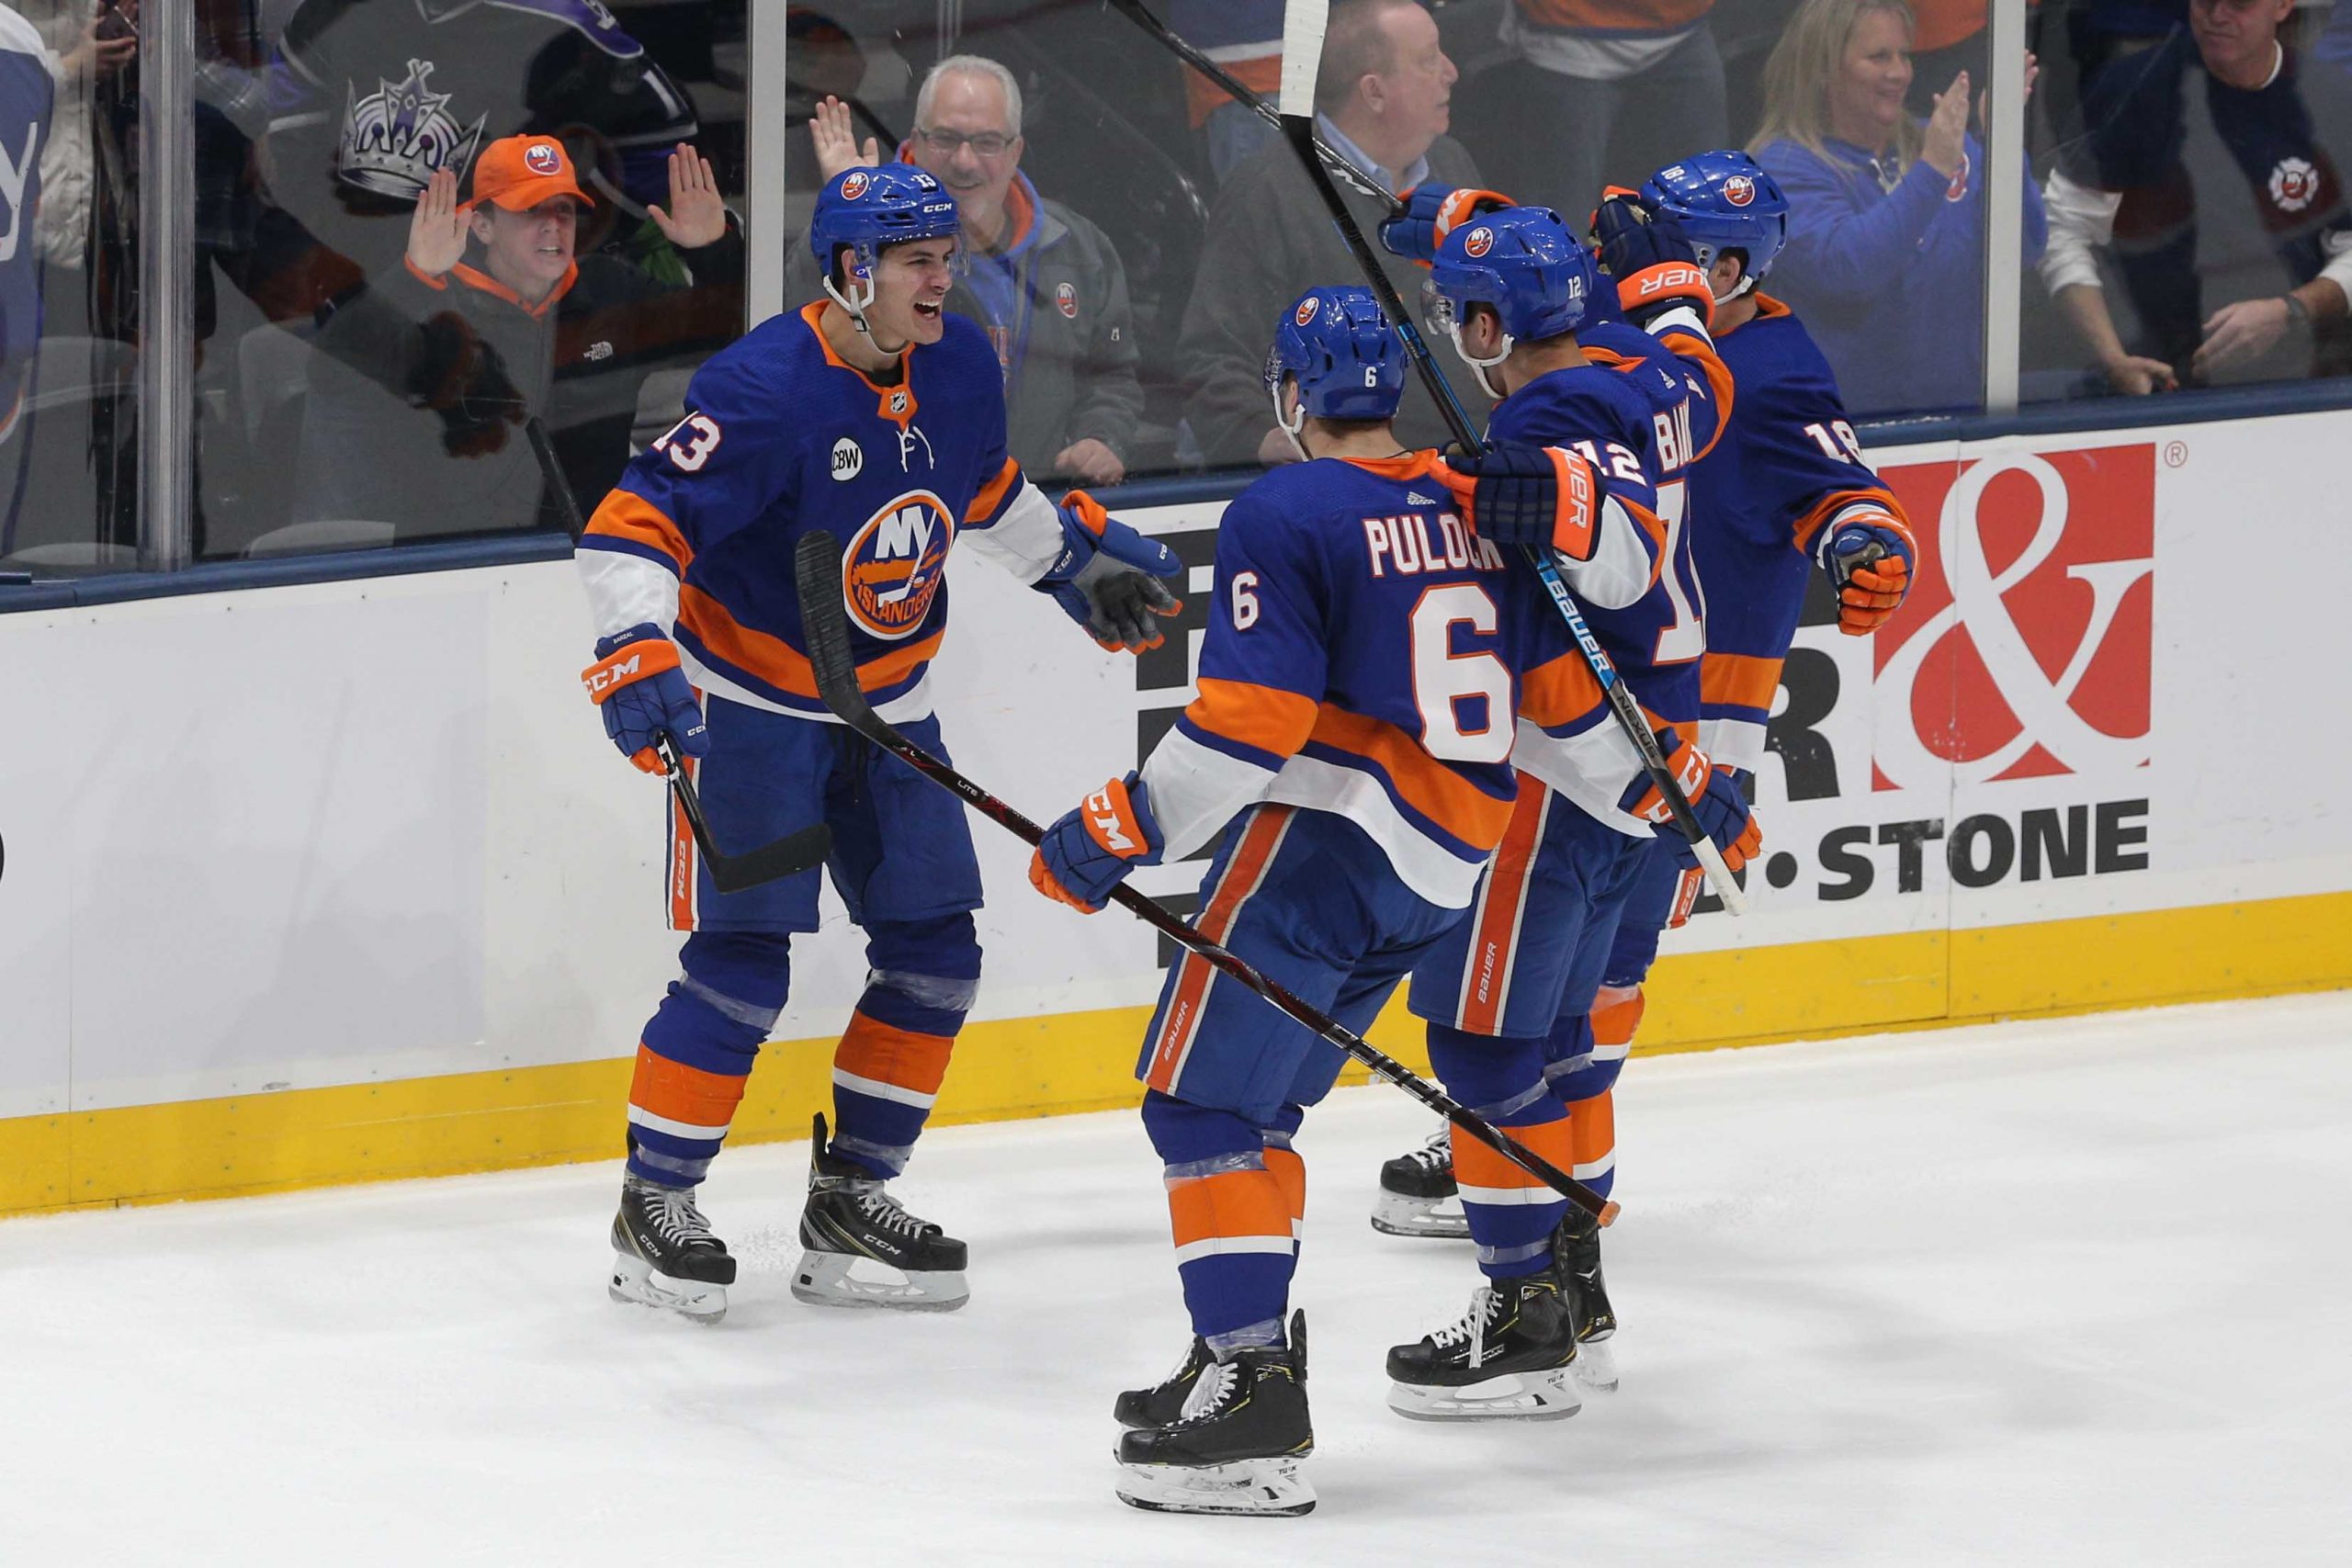 Feb 2, 2019; Uniondale, NY, USA; New York Islanders center Mathew Barzal (13) celebrates his game tying goal against the Los Angeles Kings with teammates during the third period at Nassau Veterans Memorial Coliseum. Mandatory Credit: Brad Penner-USA TODAY Sports